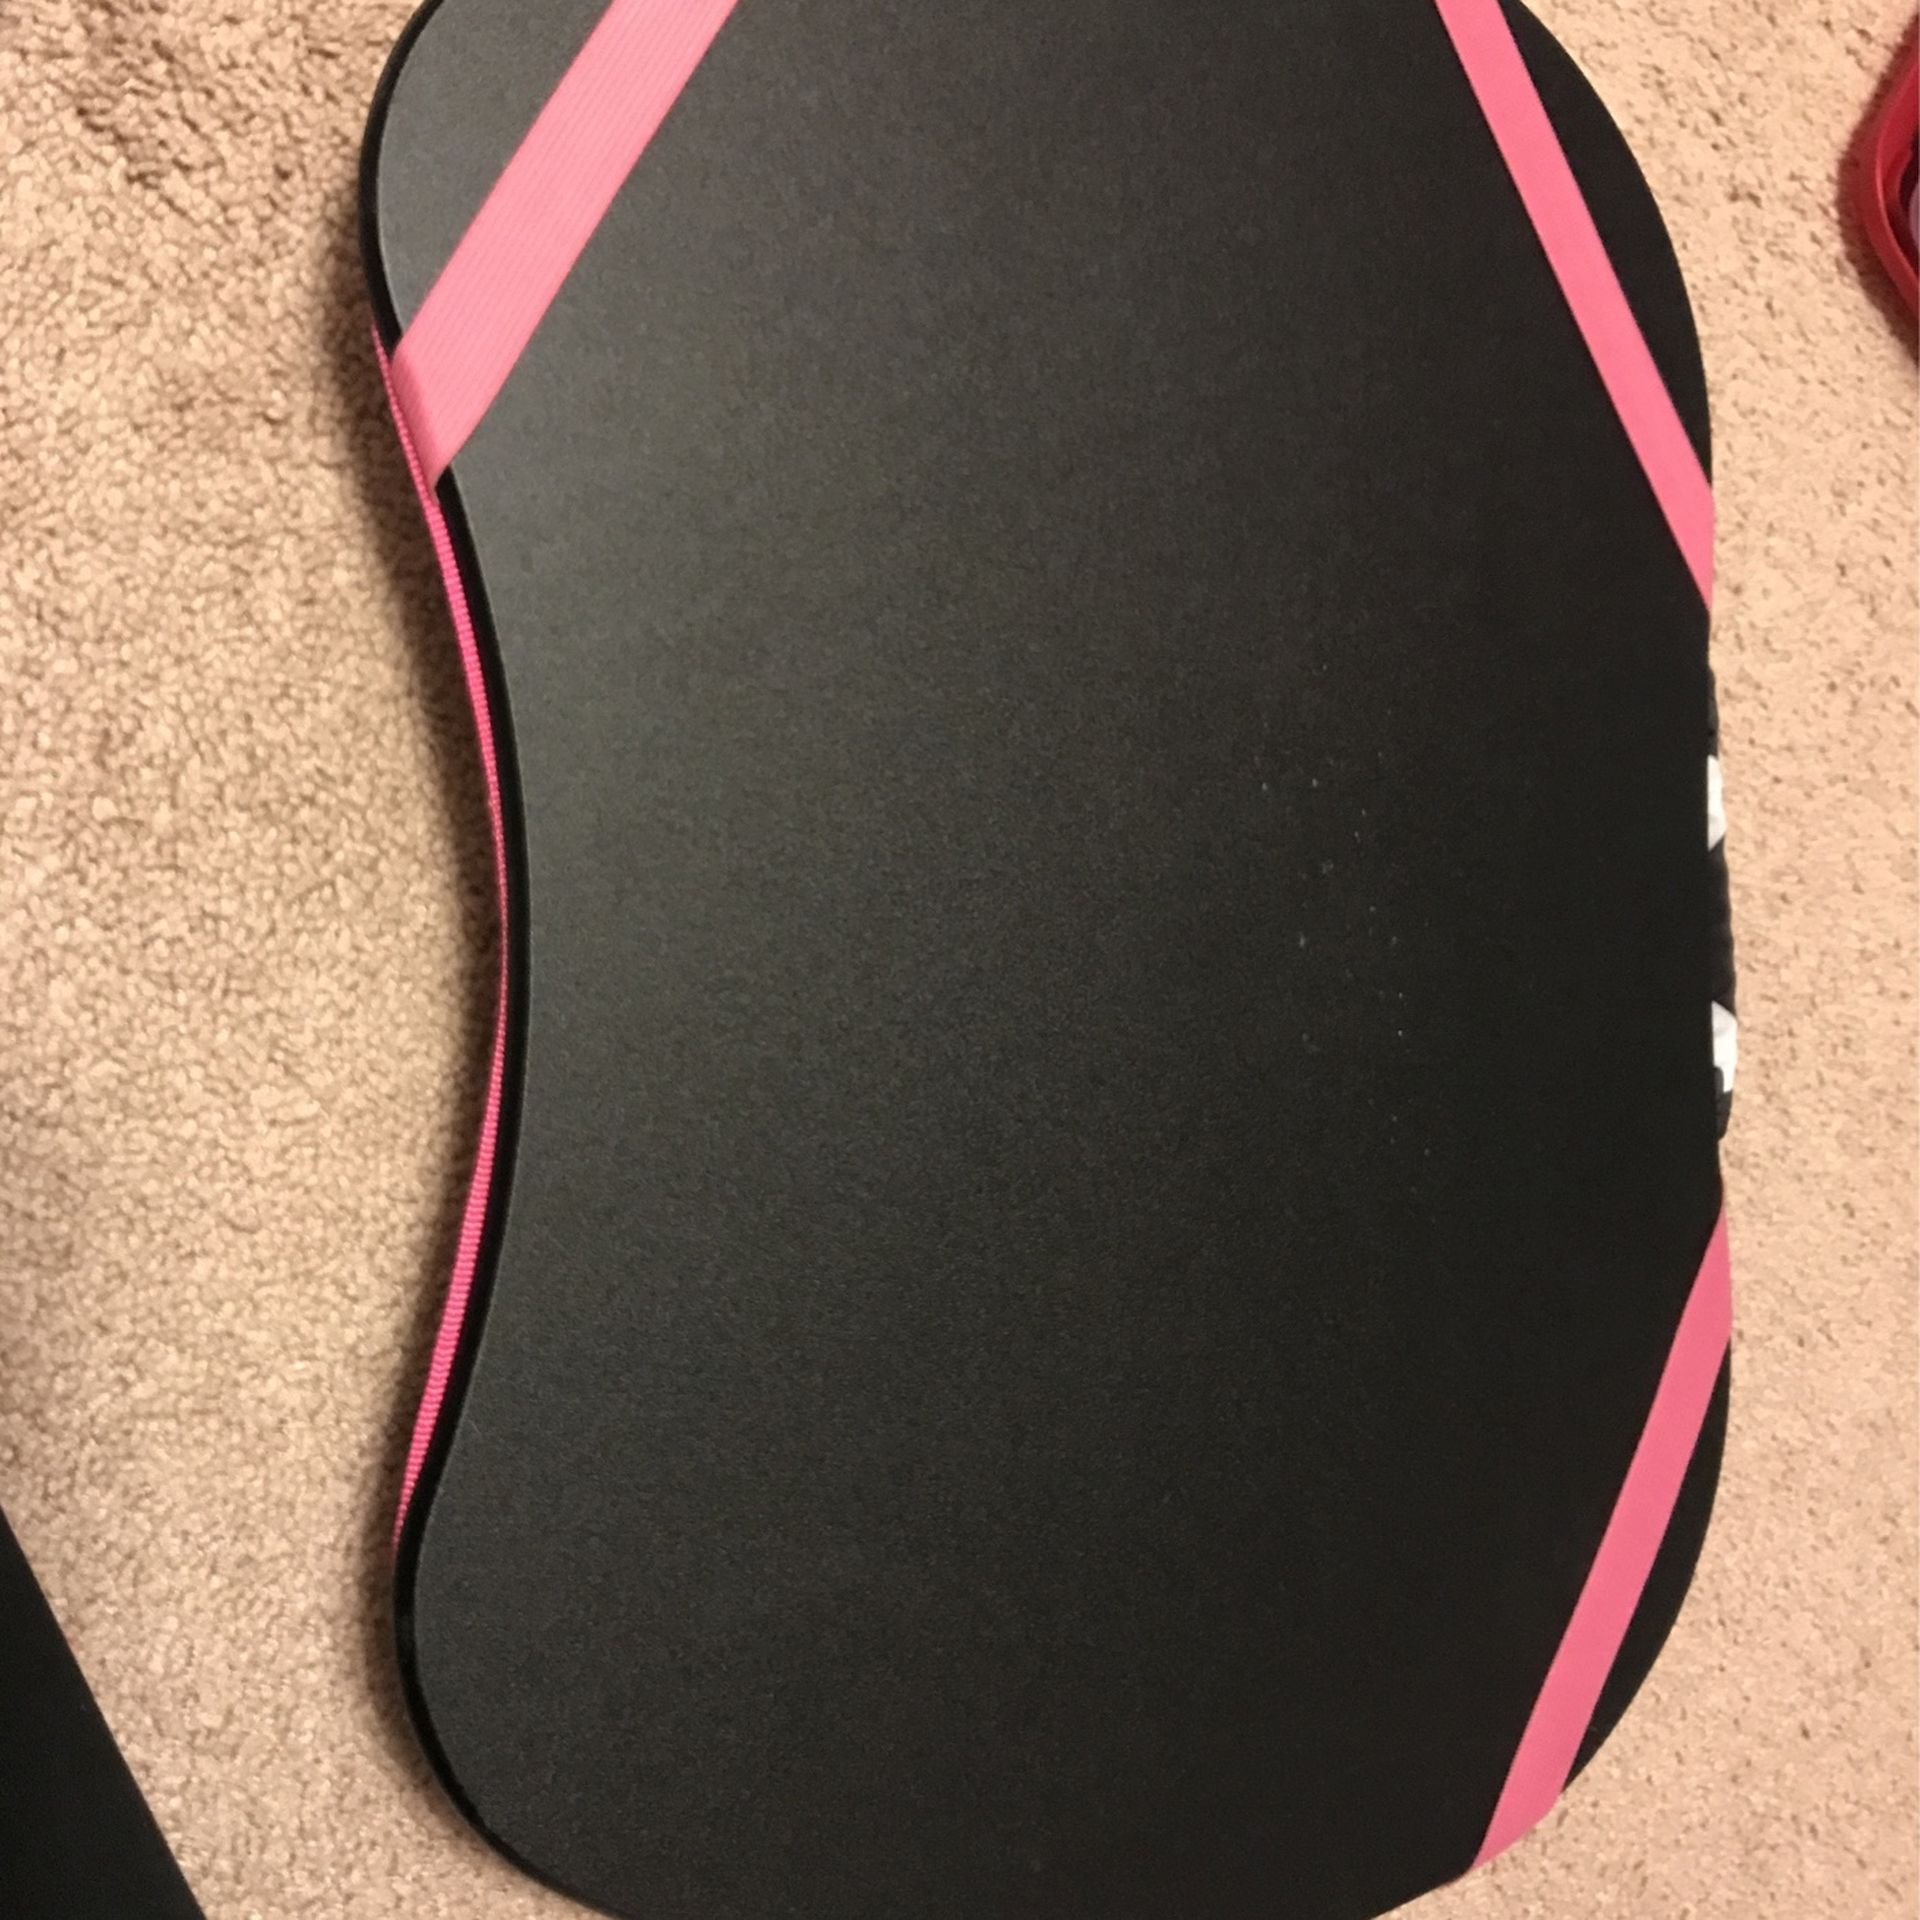 Cute lap table/pad for computer